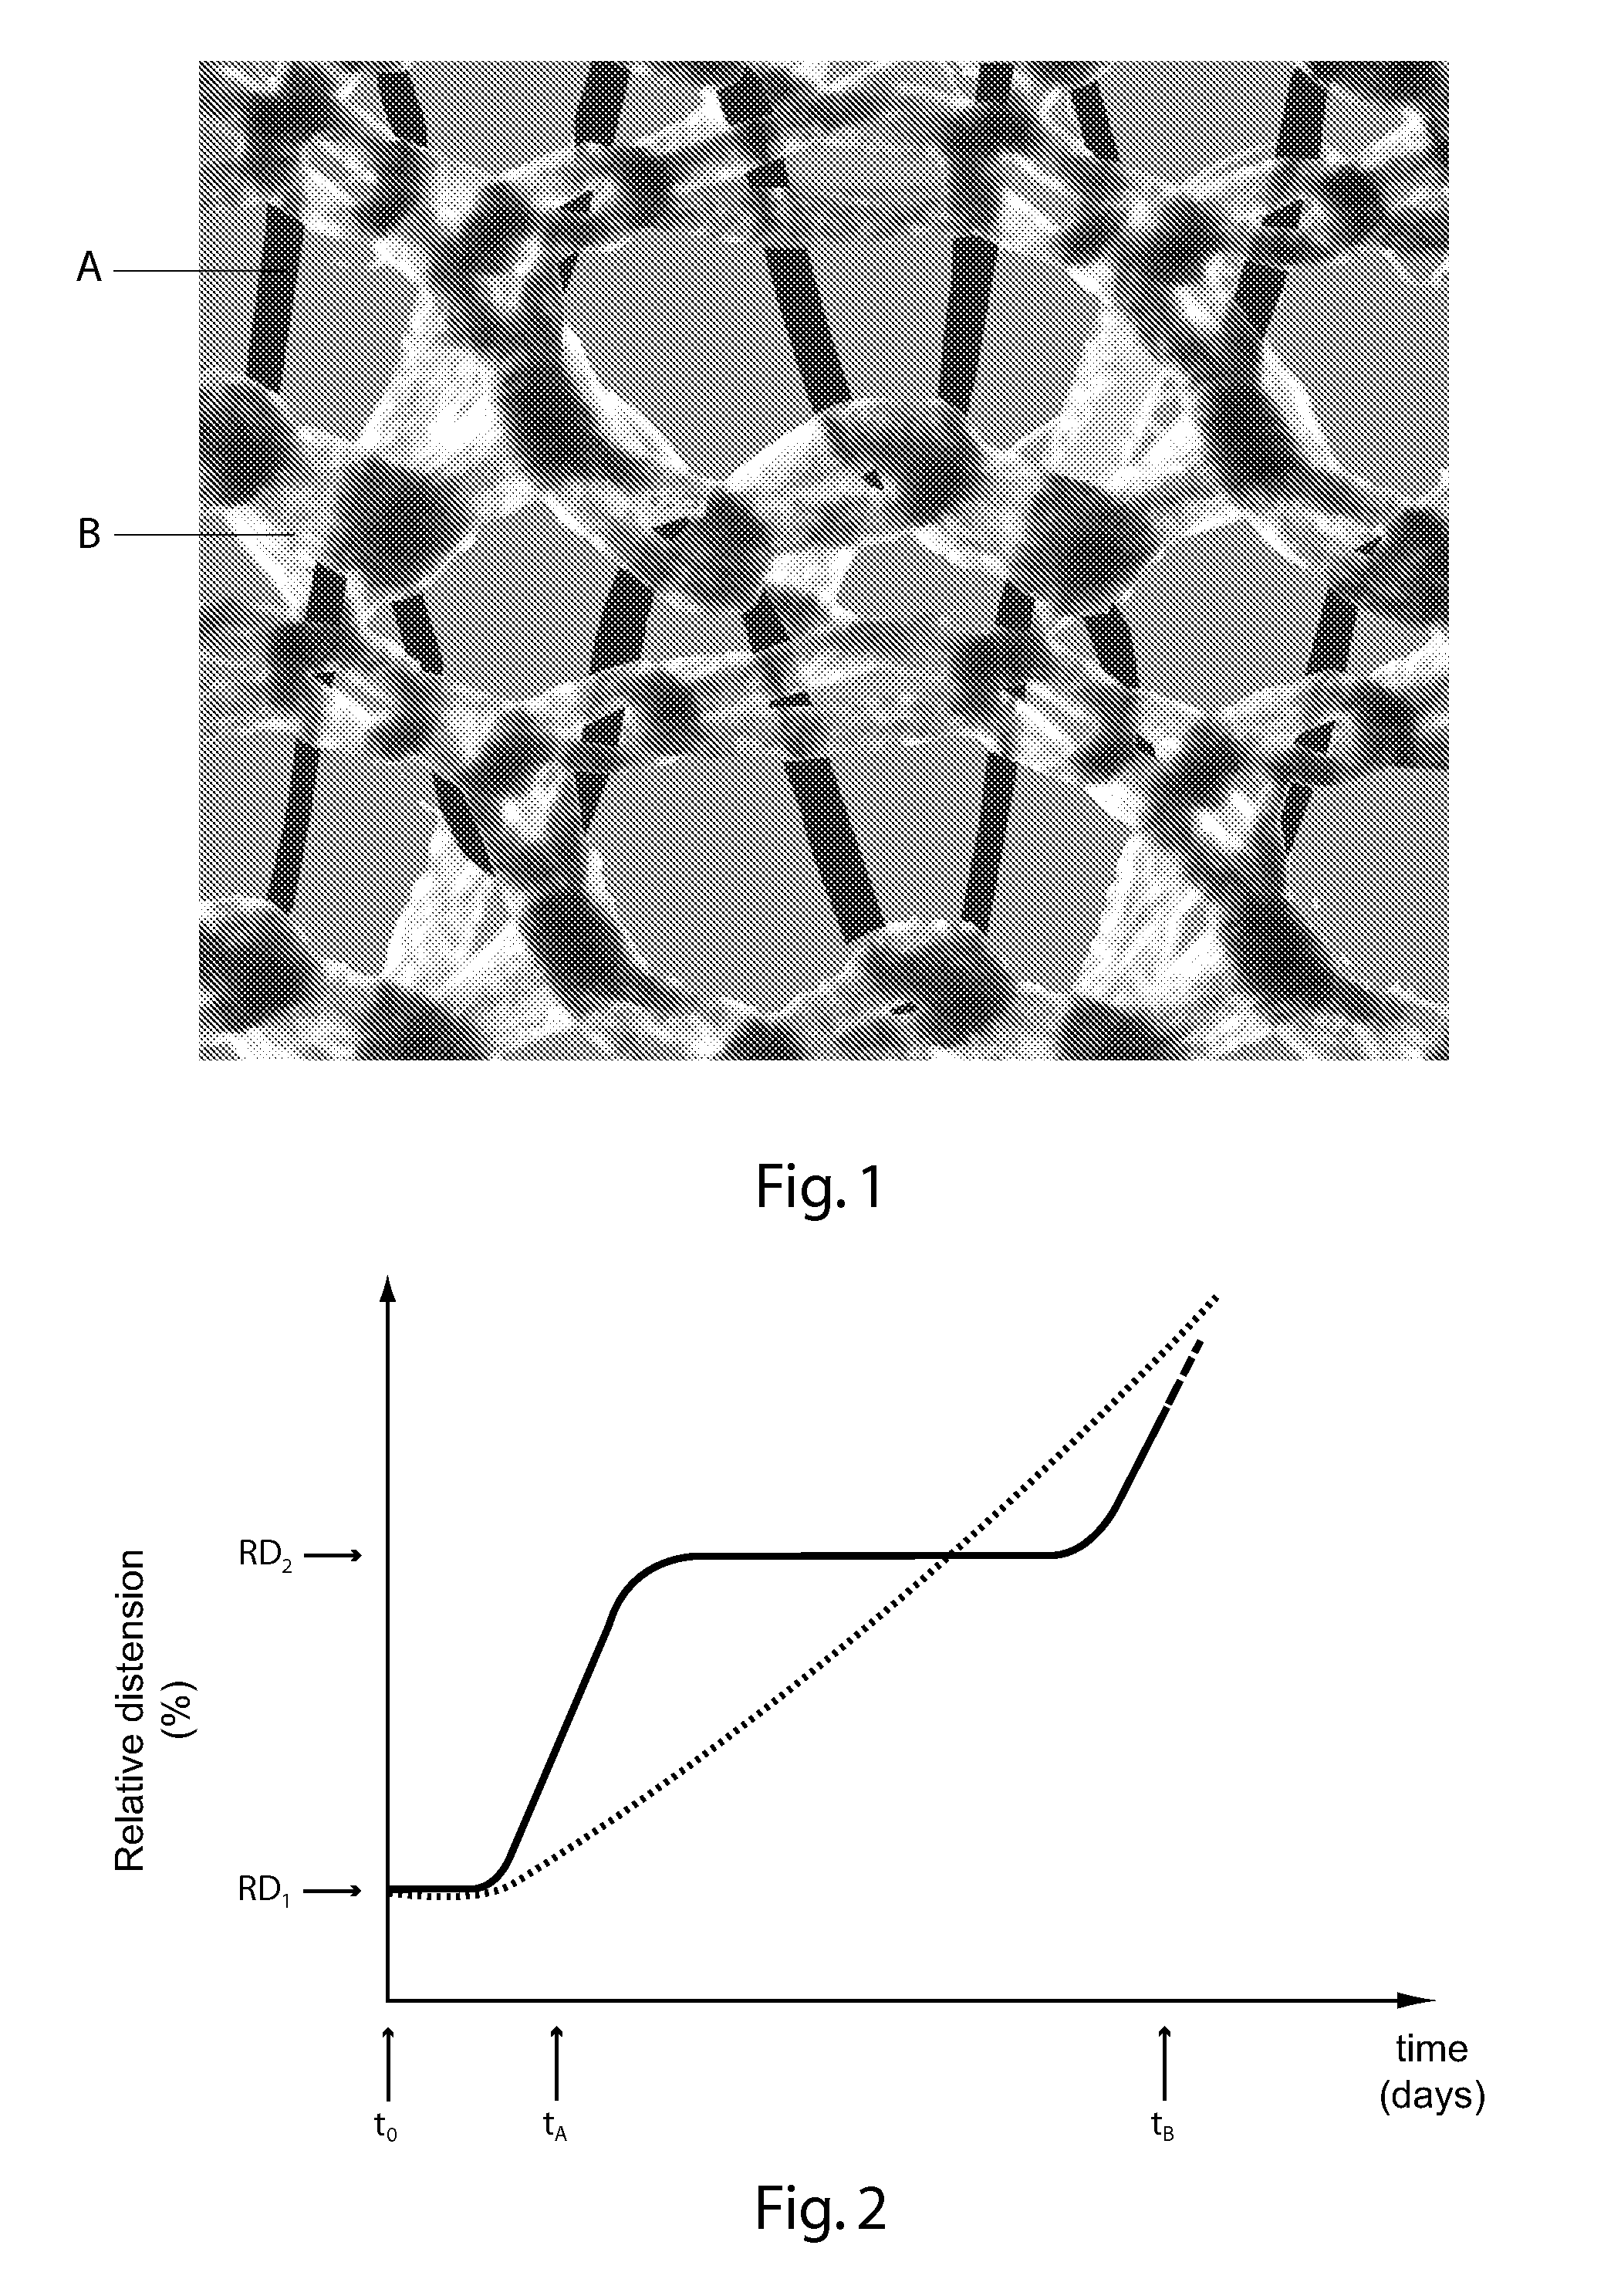 Mesh implant with an interlocking knitted structure